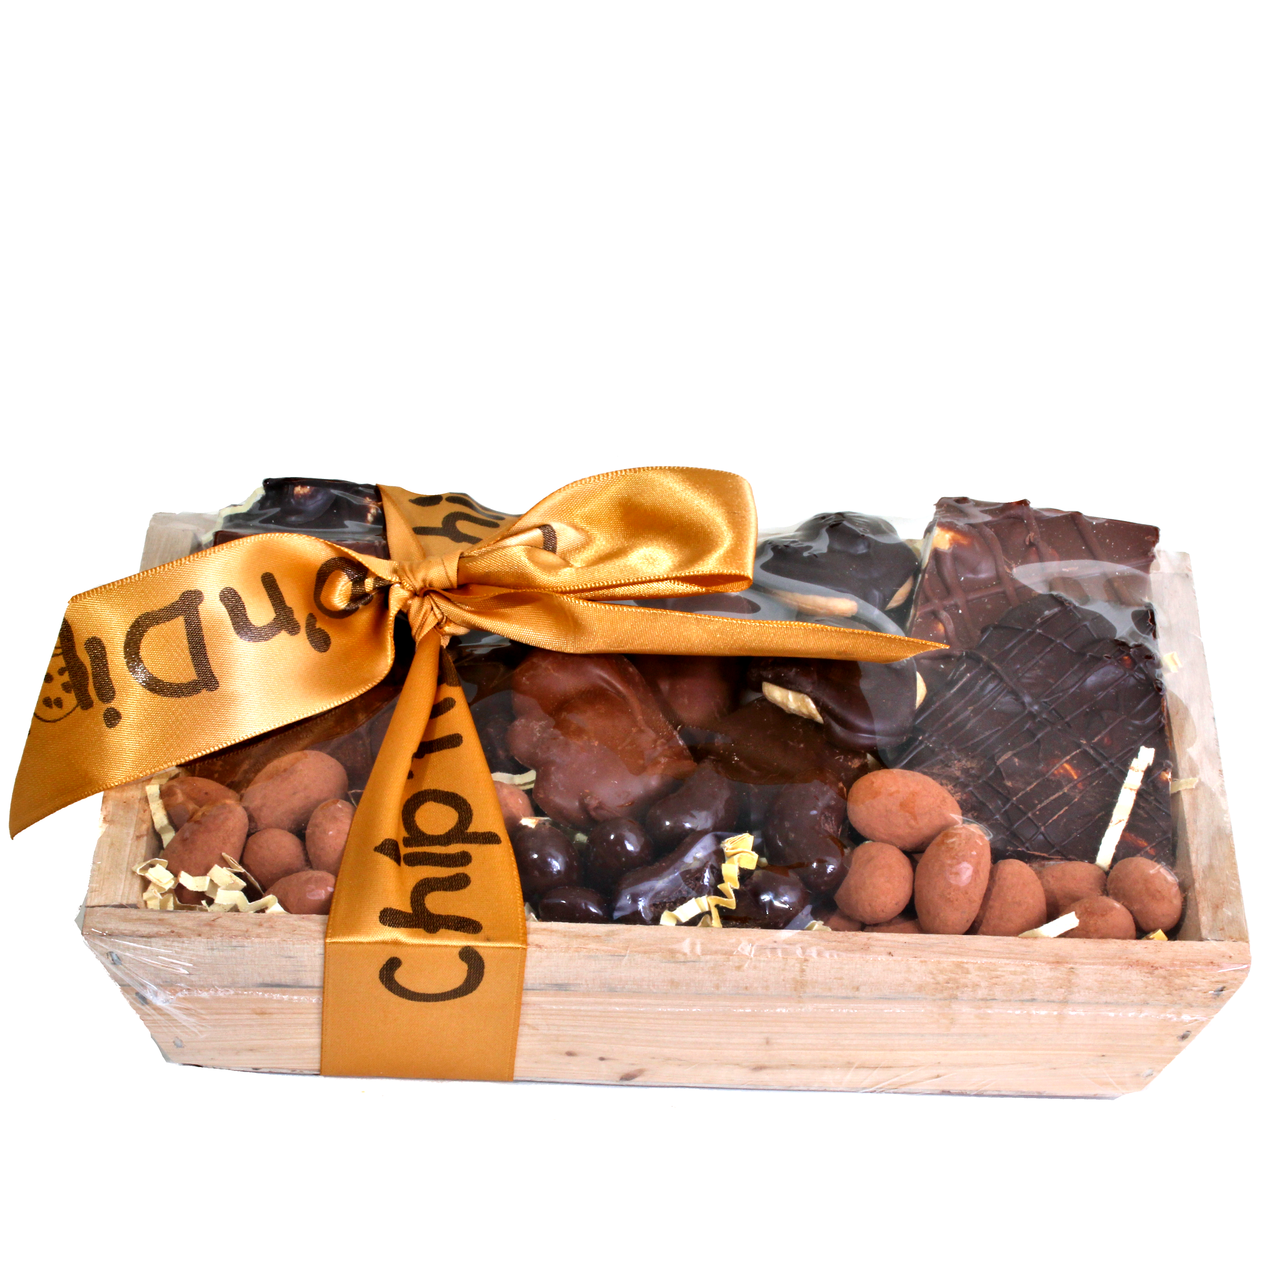 All About The Nuts Chocolate Crate